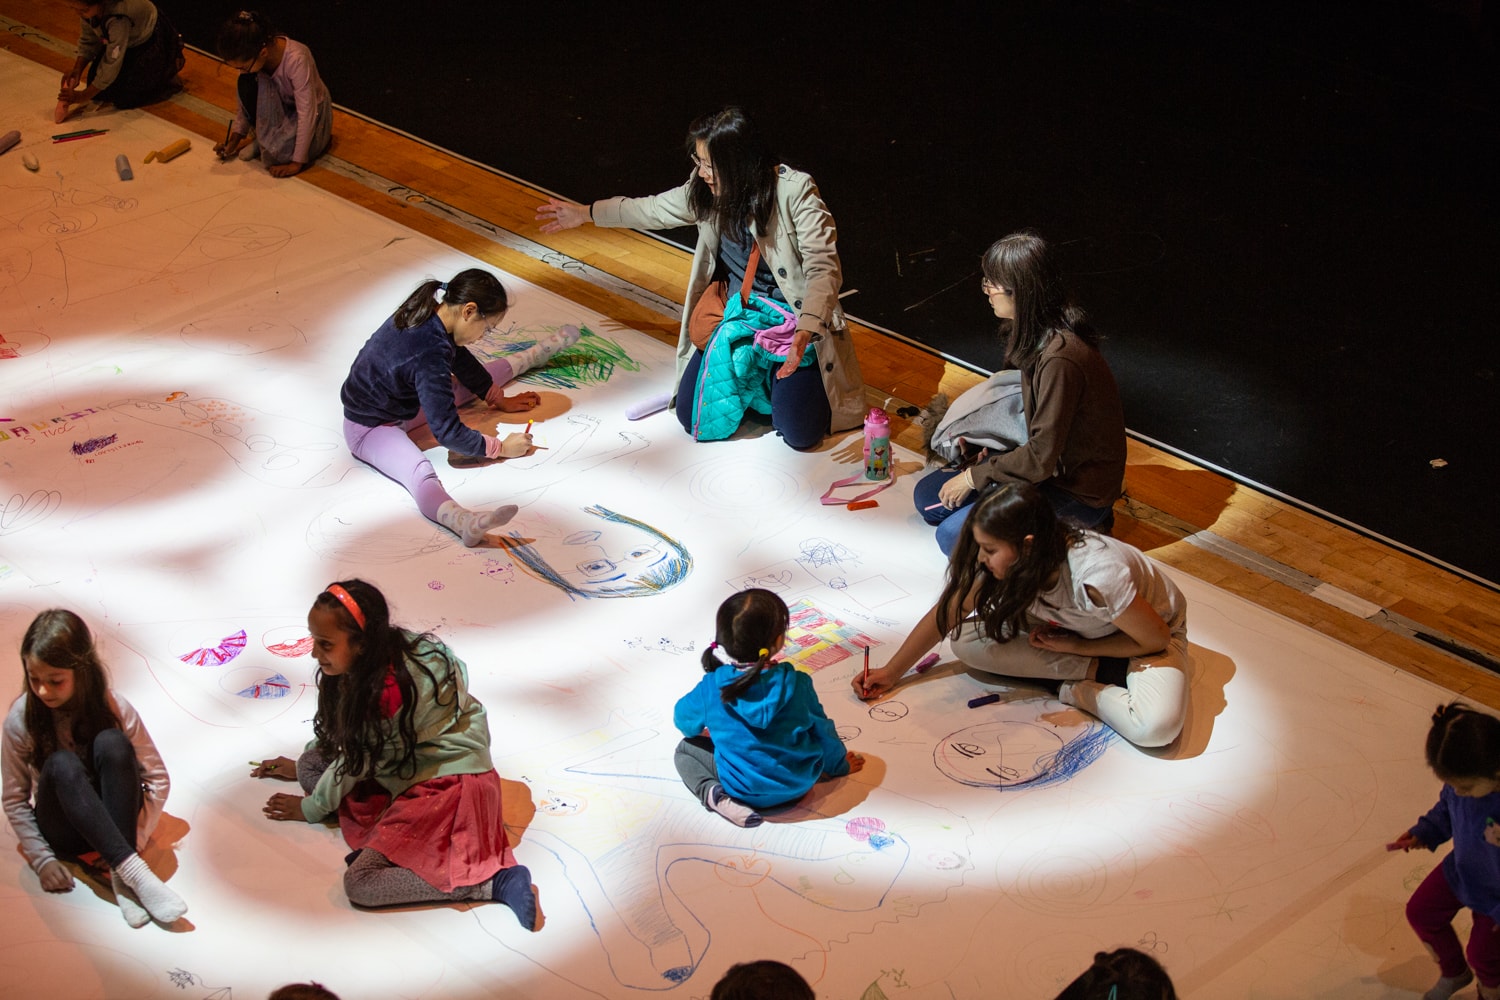 An interactive community art project. A large canvas spreads across the floor where families and young people are drawing and making art. Projected lights illuminate the canvas in abstract shapes.